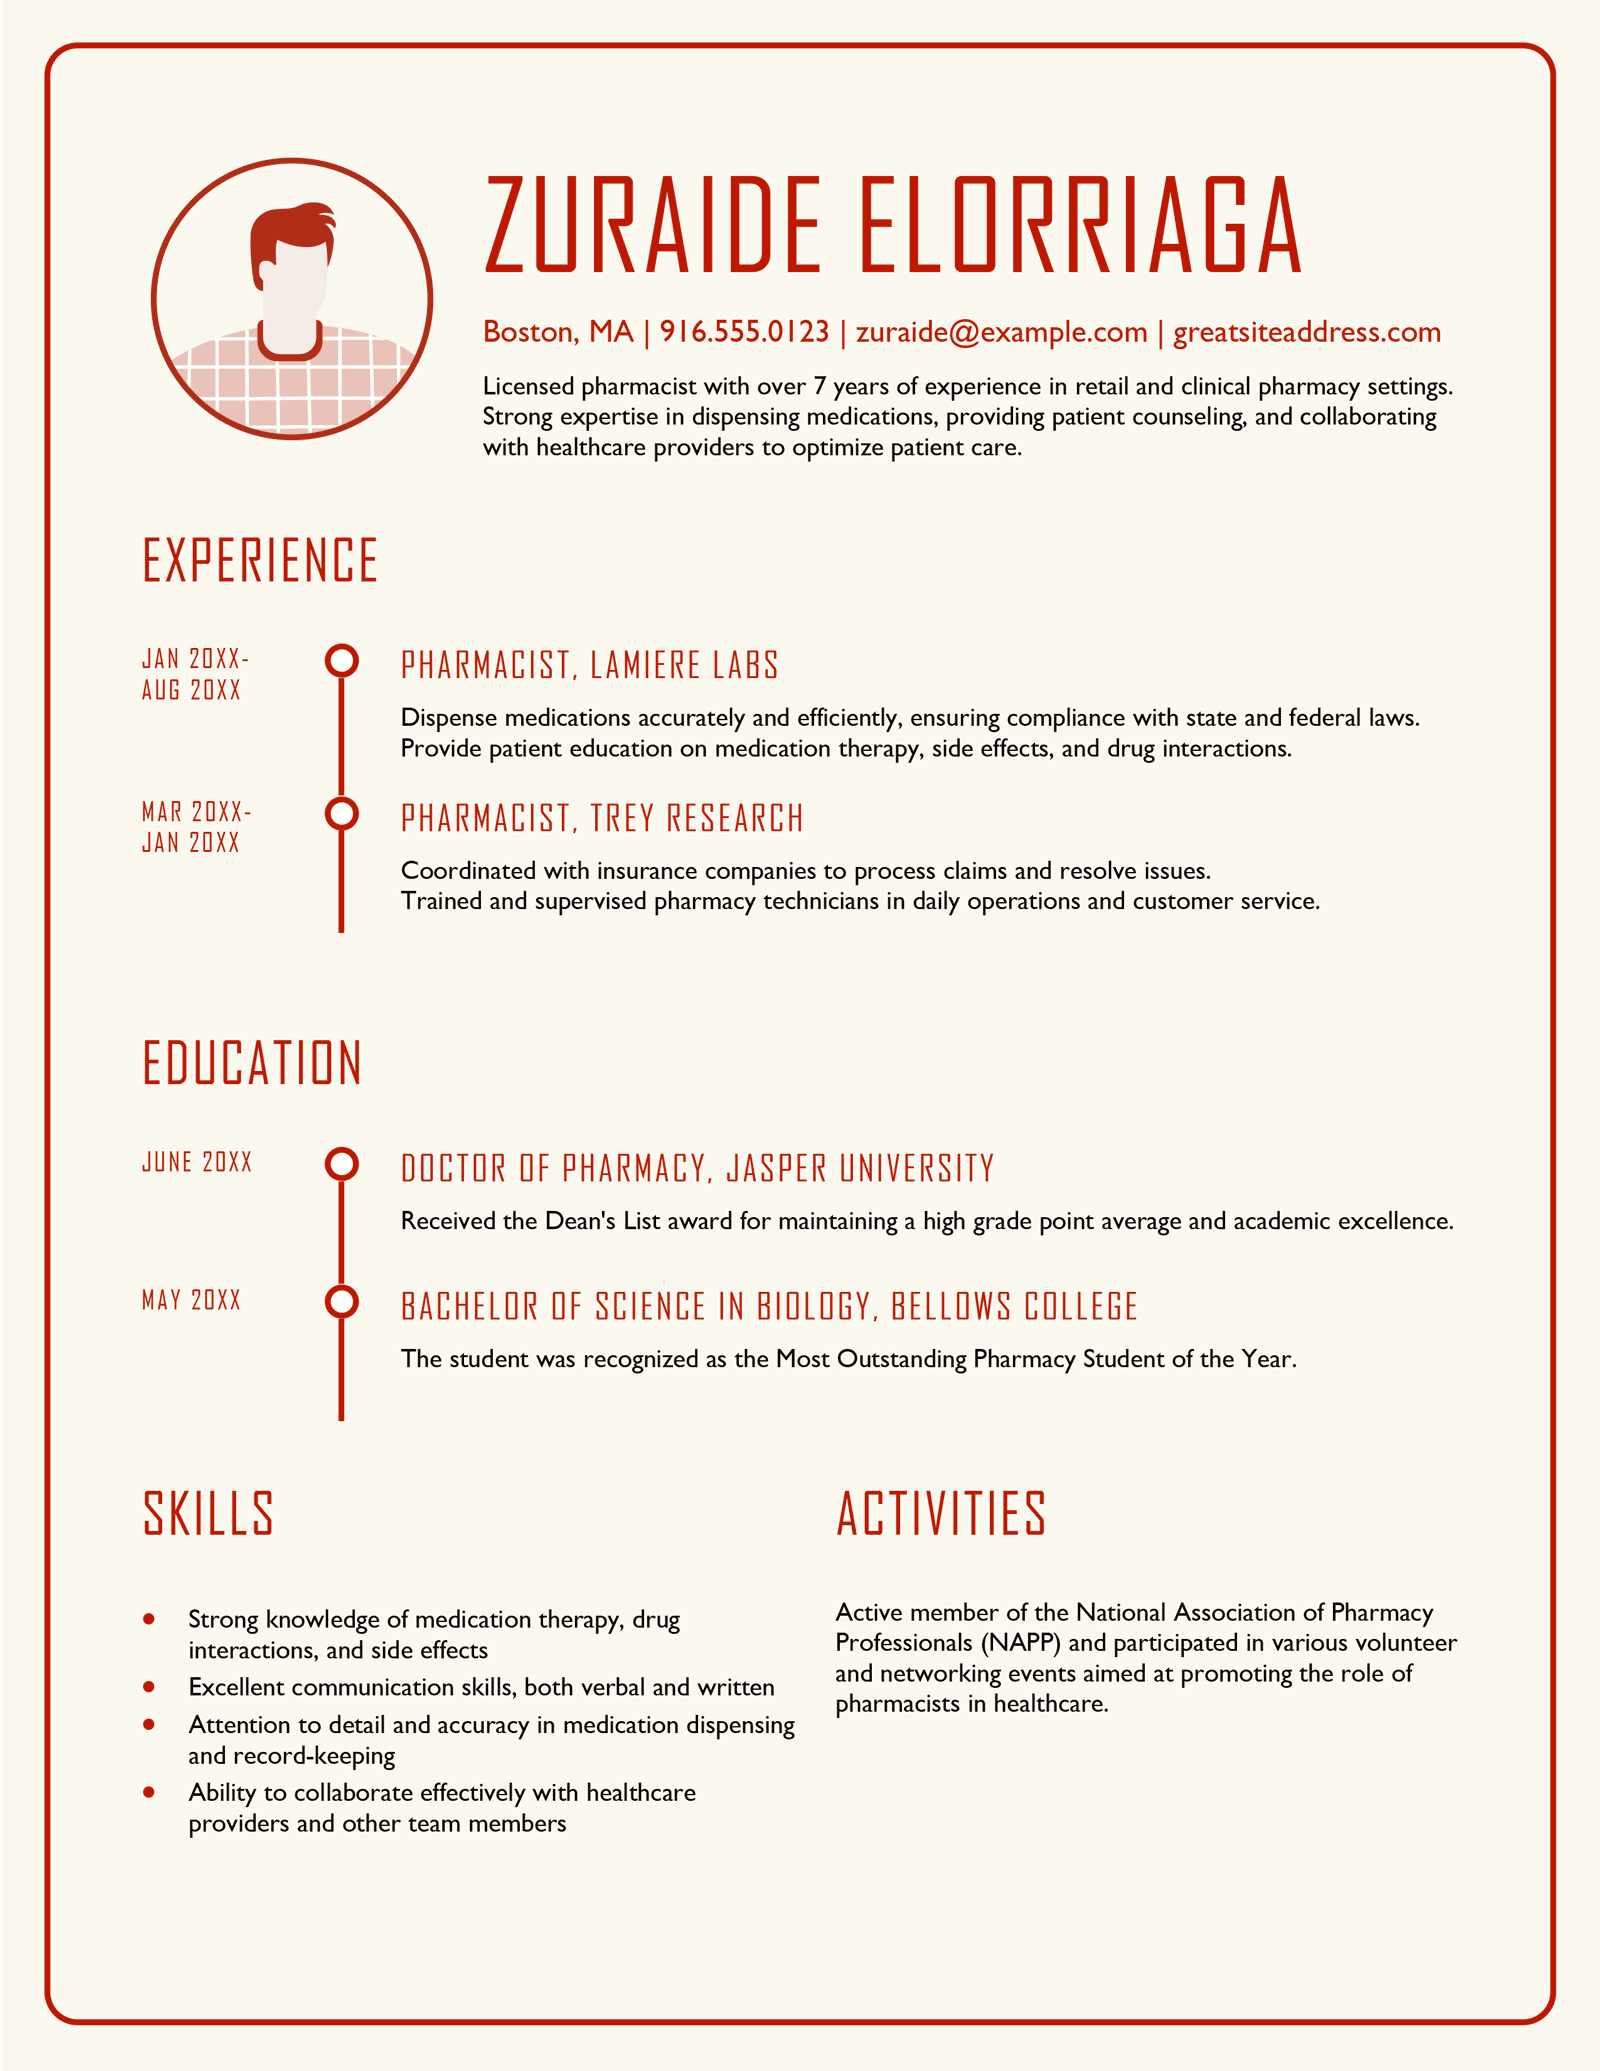 The Modern Chronological CV template from Microsoft Word with a unique design including an off-white background with red headings.